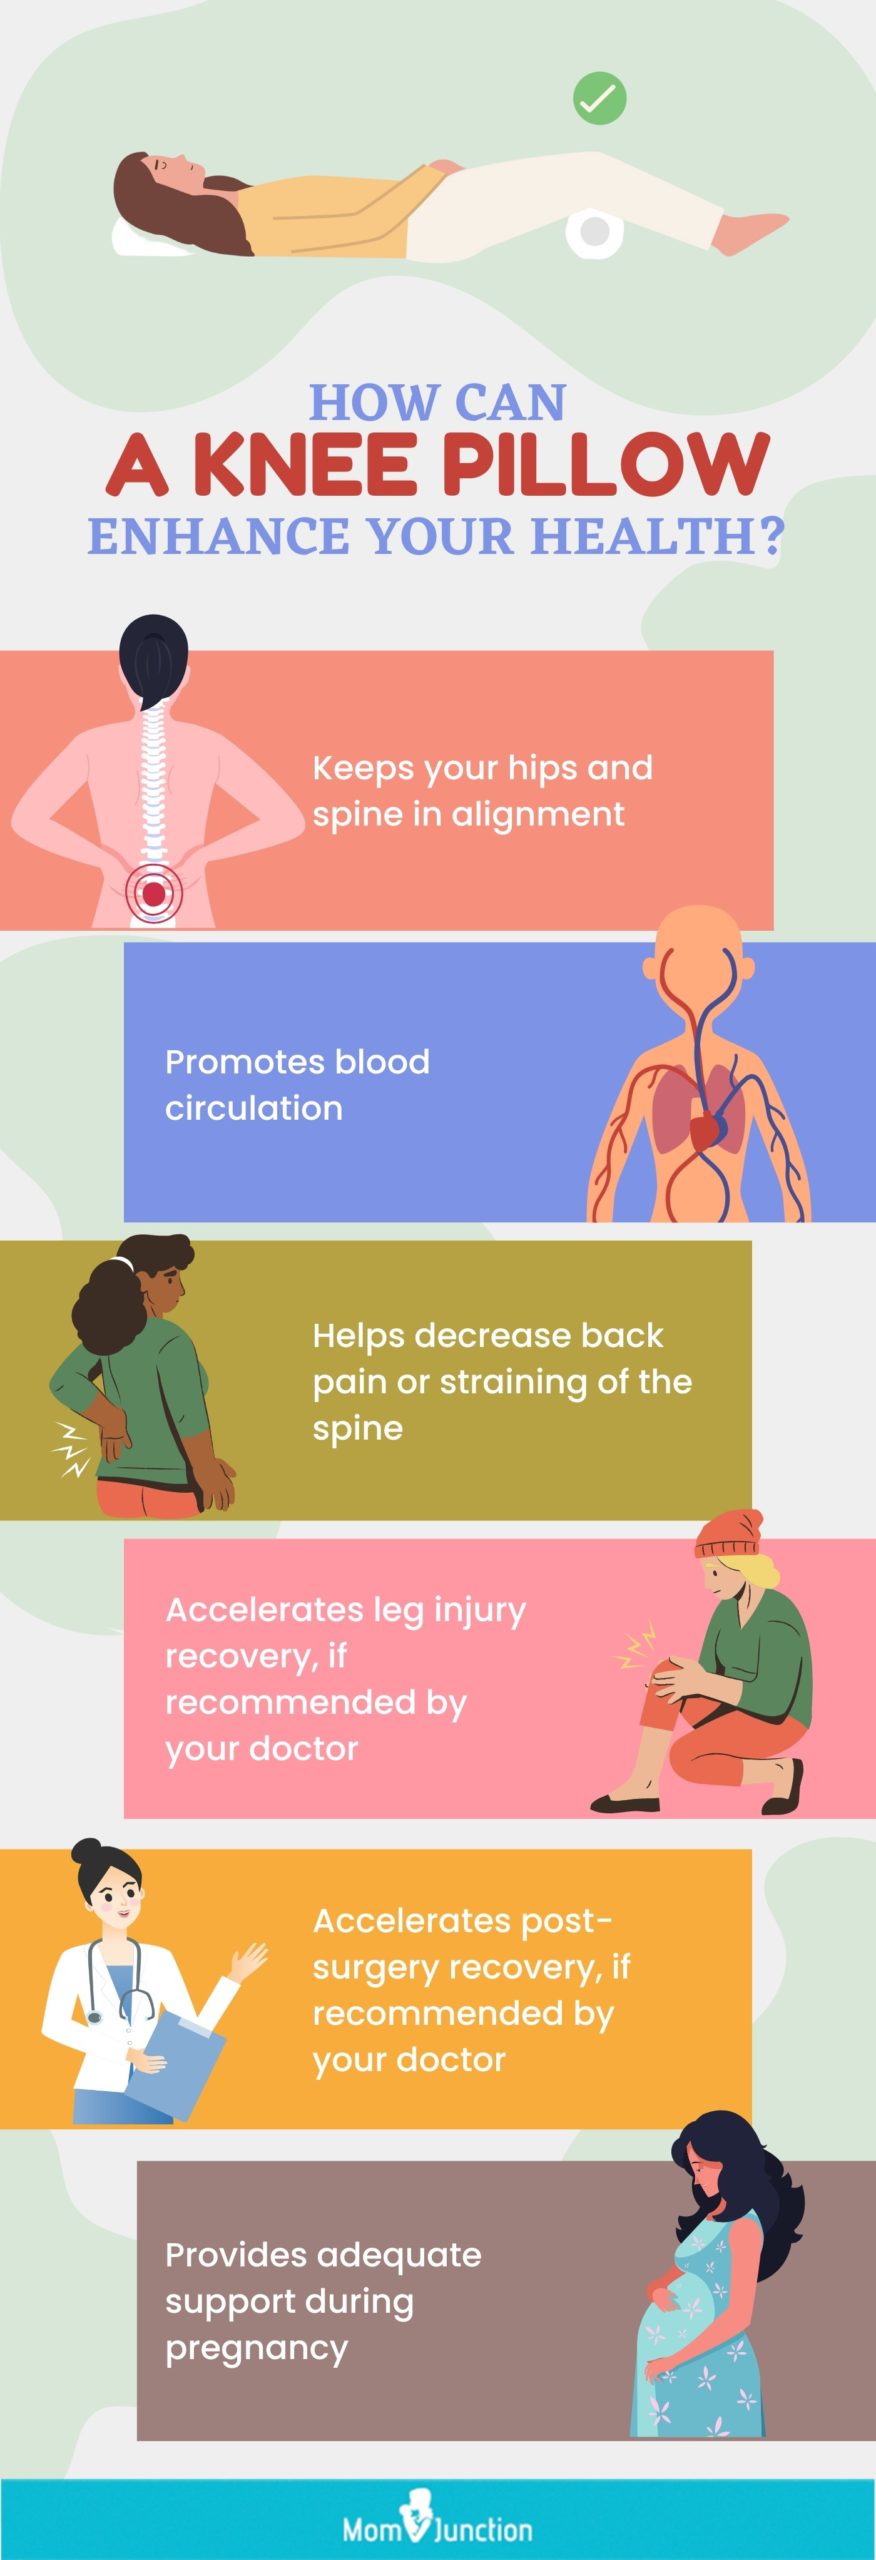 How Can A Knee Pillow Enhance Your Health (Infographic)